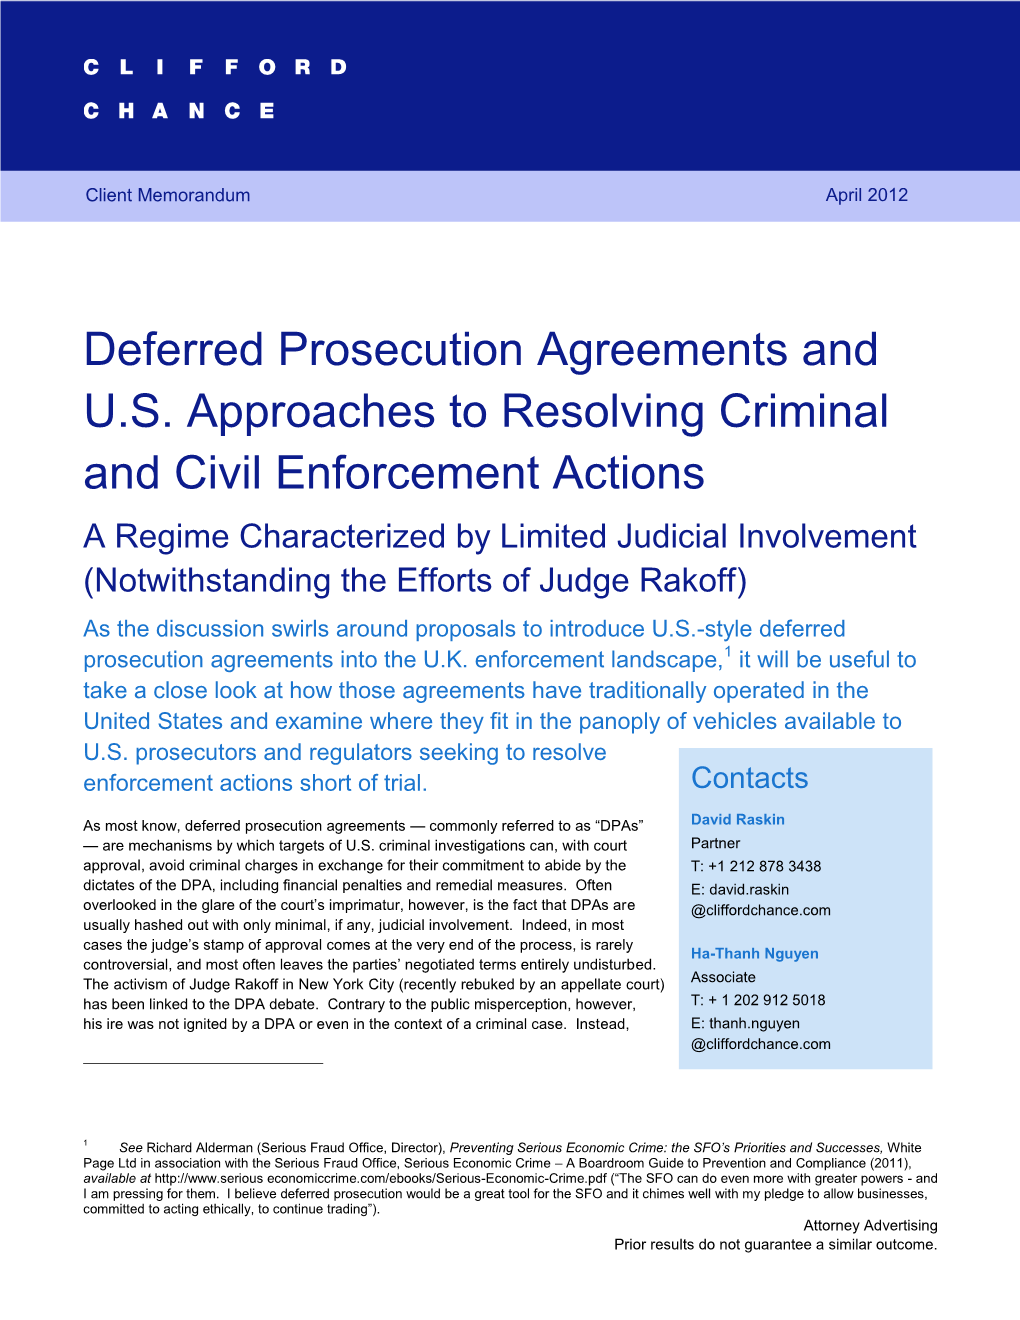 Deferred Prosecution Agreements and U.S. Approaches to Resolving